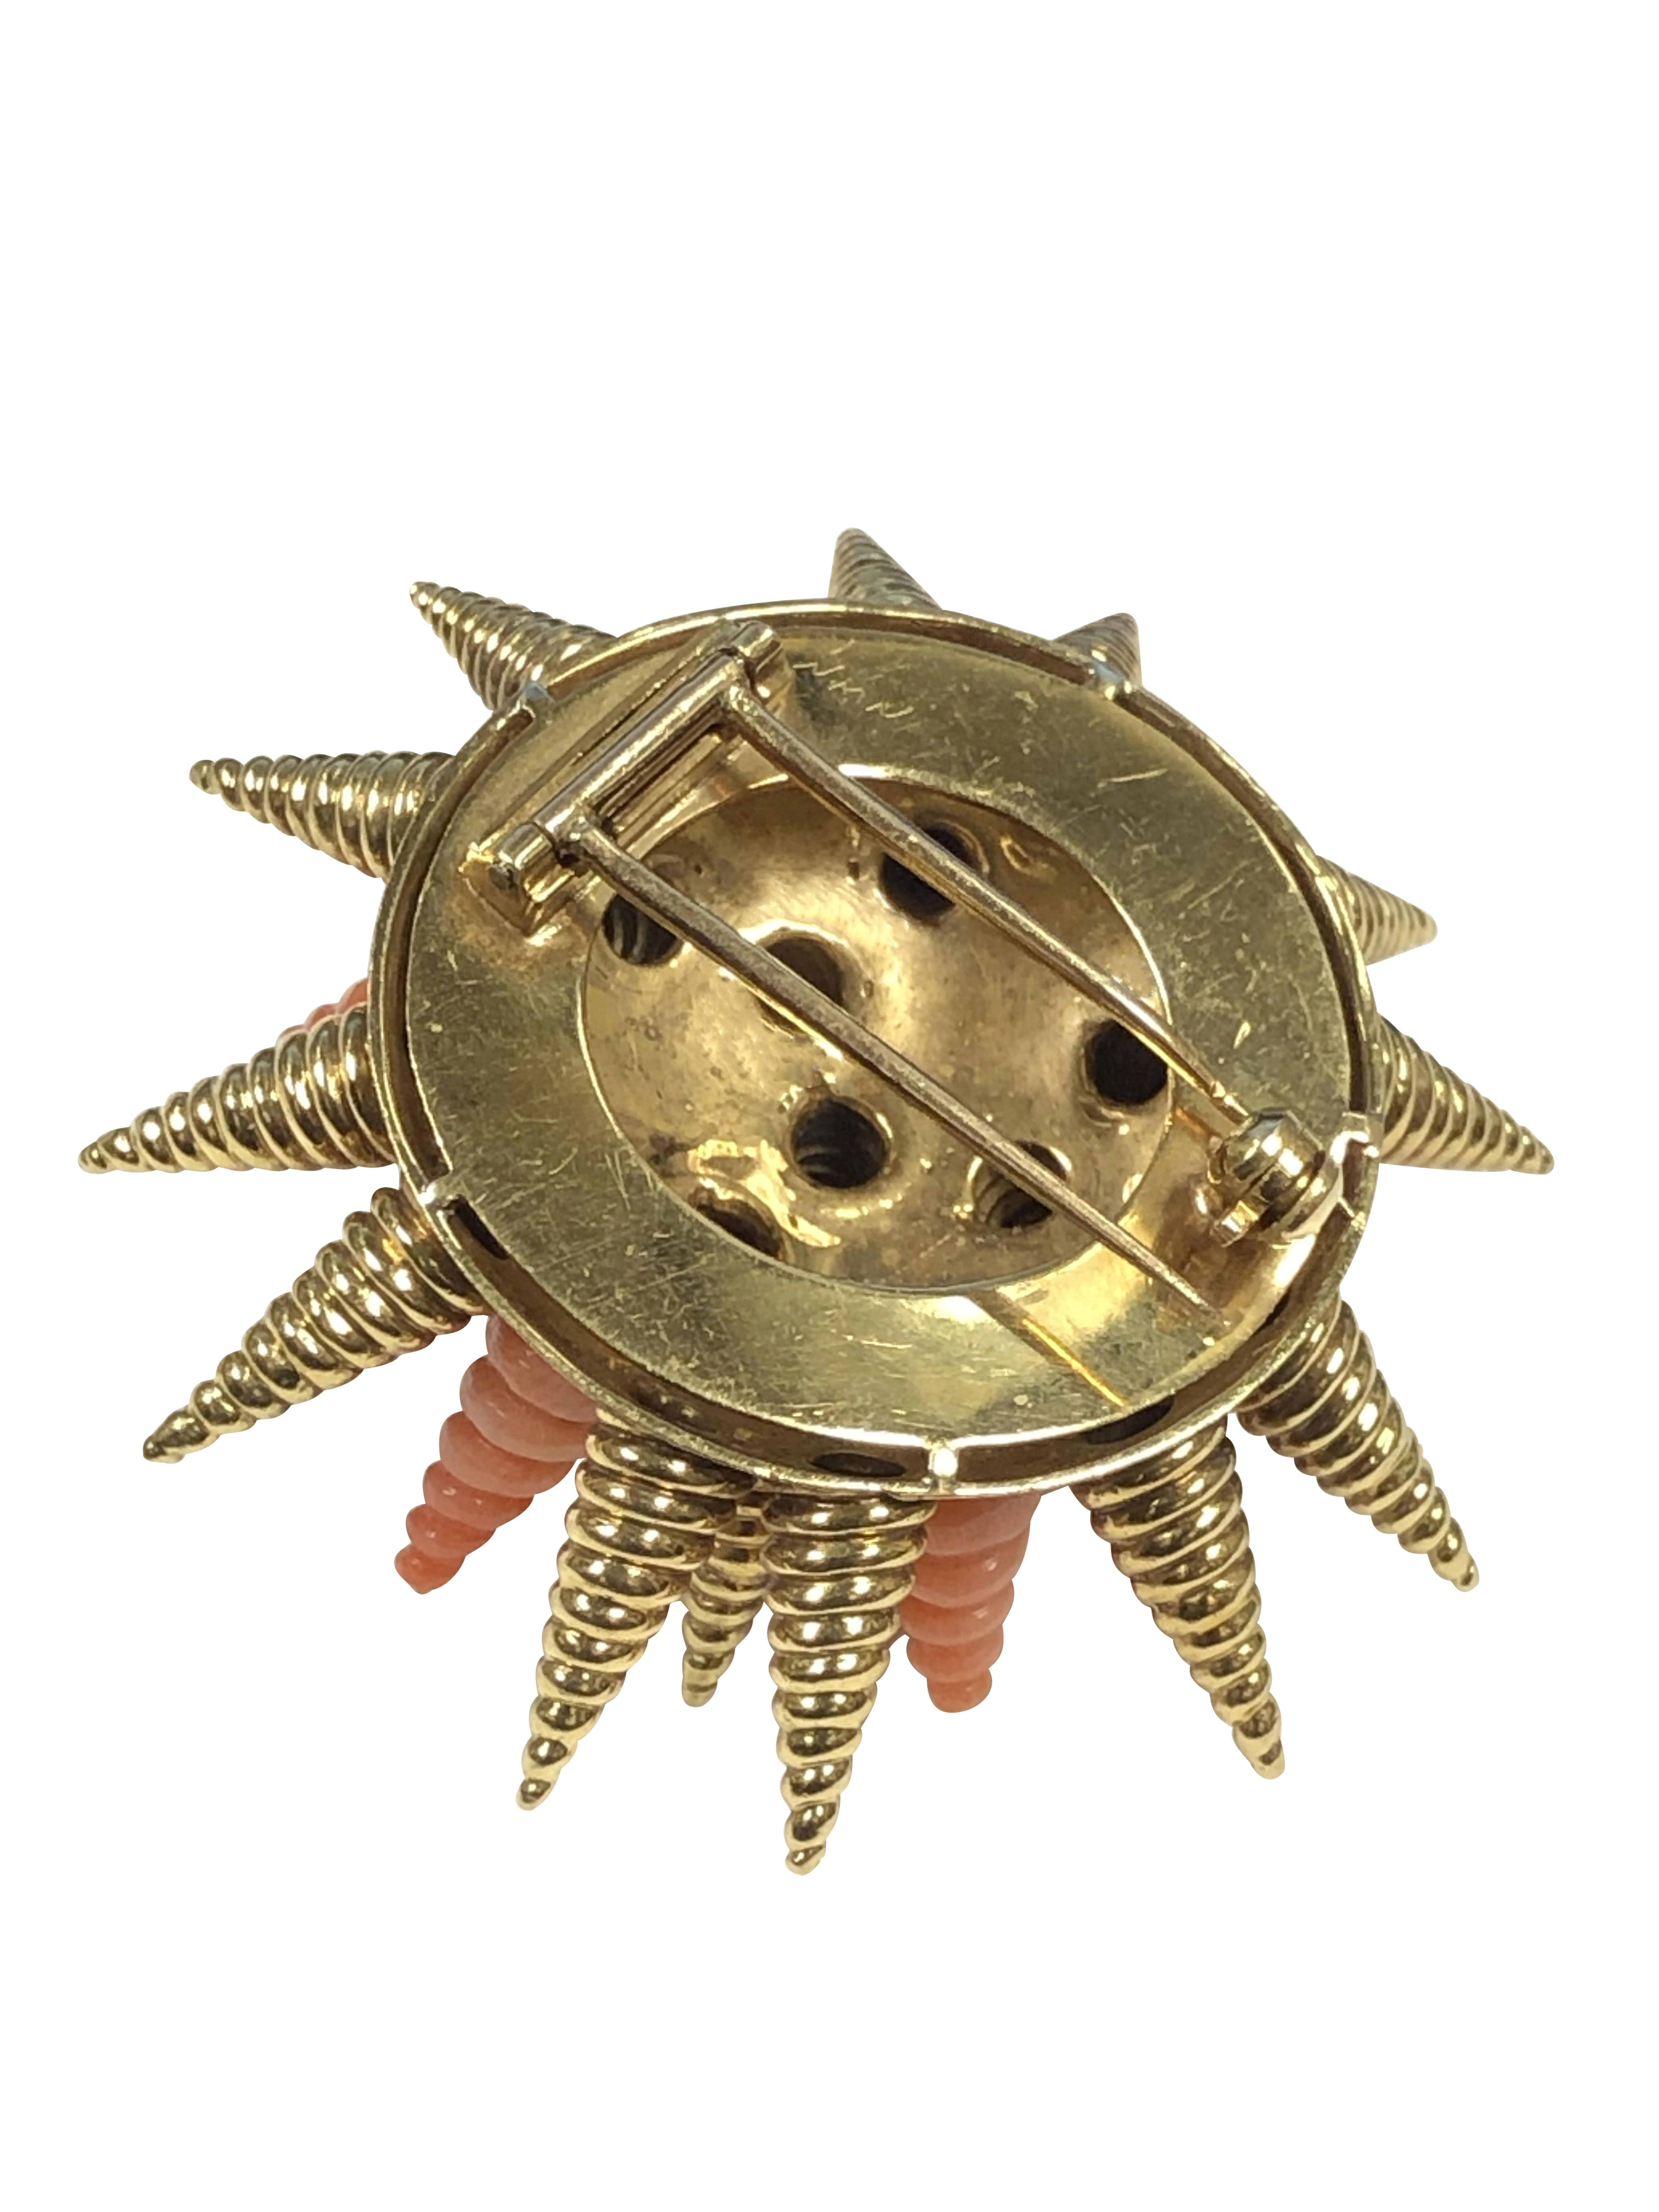 Circa 1960s Tiffany & Company Sea Urchin Brooch, Measuring 2 1/8 inches in Diameter and 1 inch in height. Comprised of 18K Yellow Gold pointed Spines and Carved Coral Pointed Spines. weighing 42.6 Grams and having a Double Clip pin with lock faster.